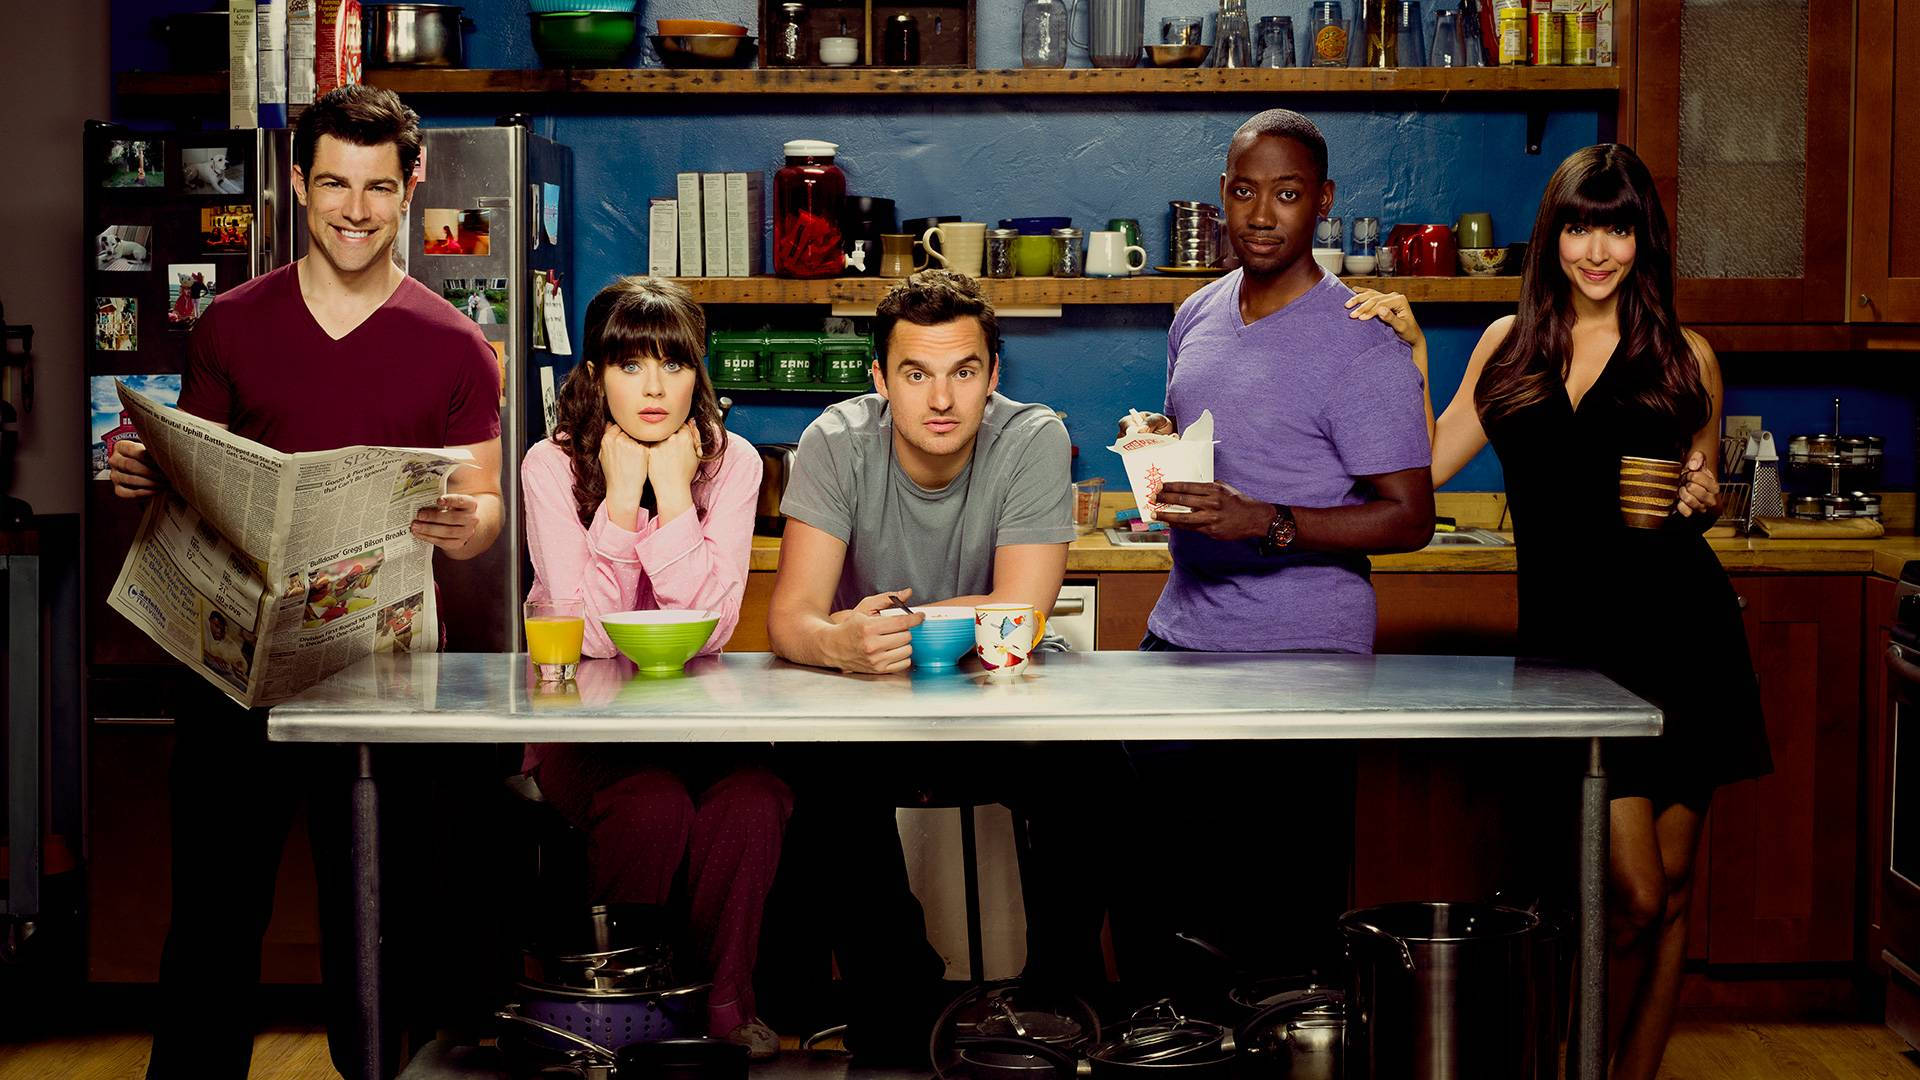 Sitcom New Girl's Cast Behind Apartment's Kitchen Wallpaper